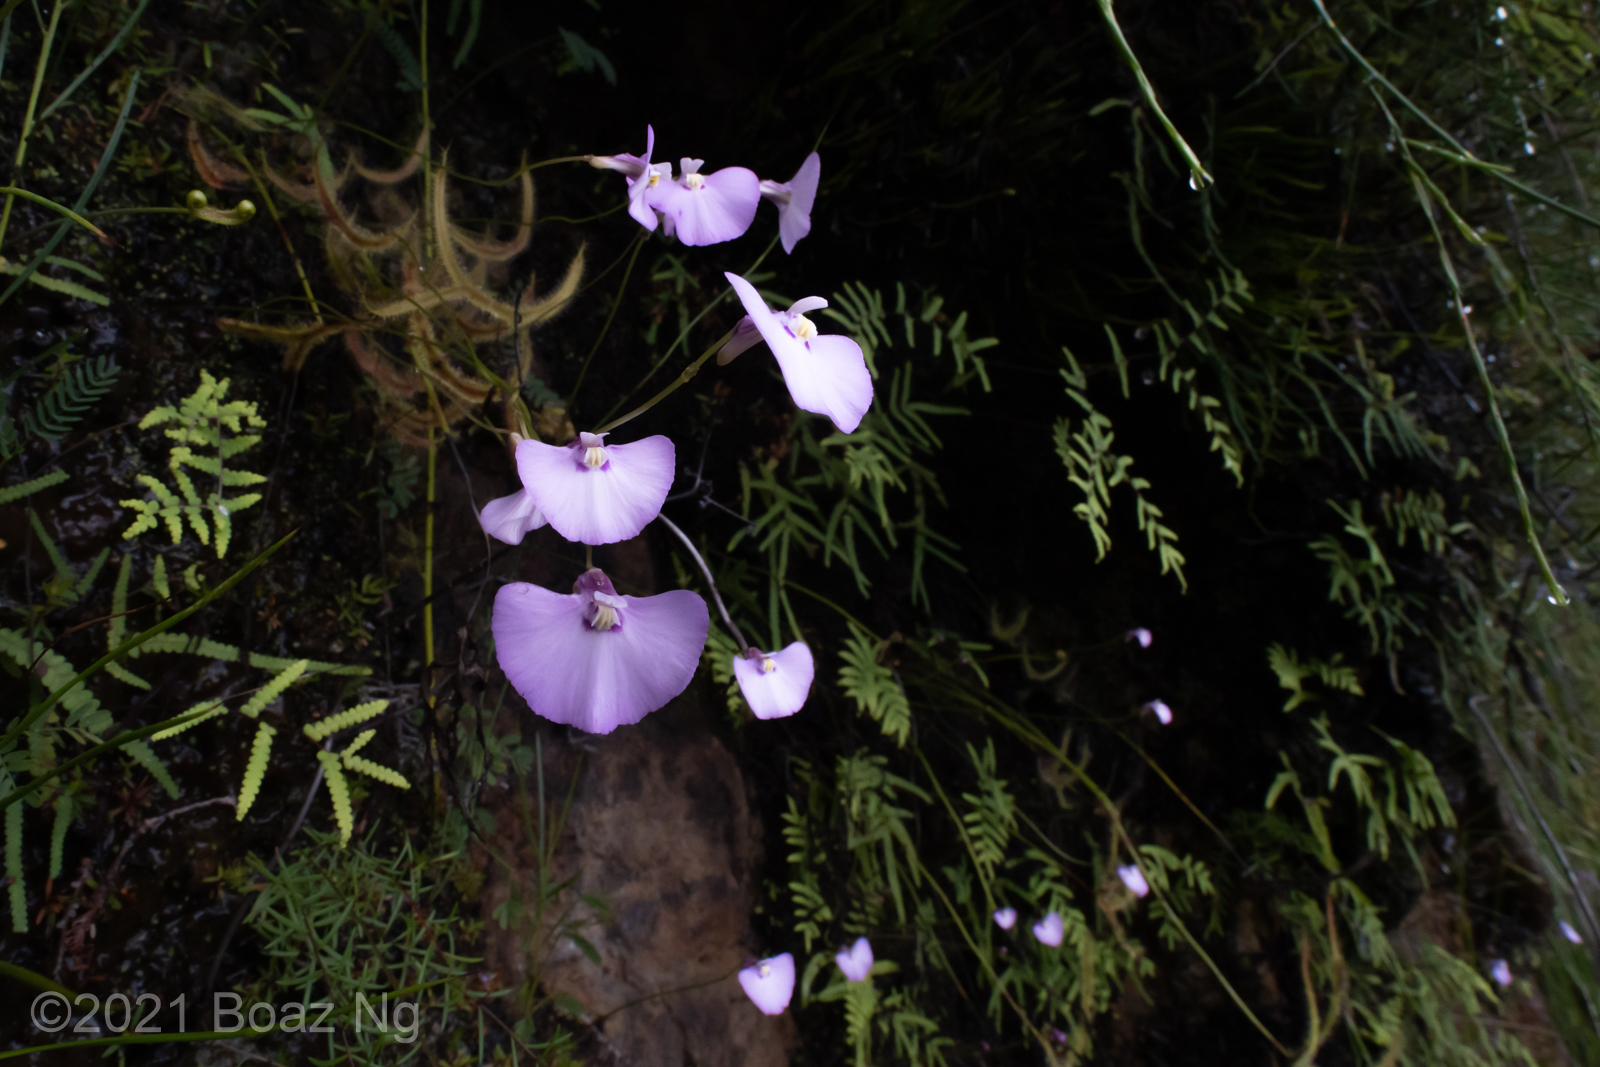 An excellent display of Utricularia uniflora